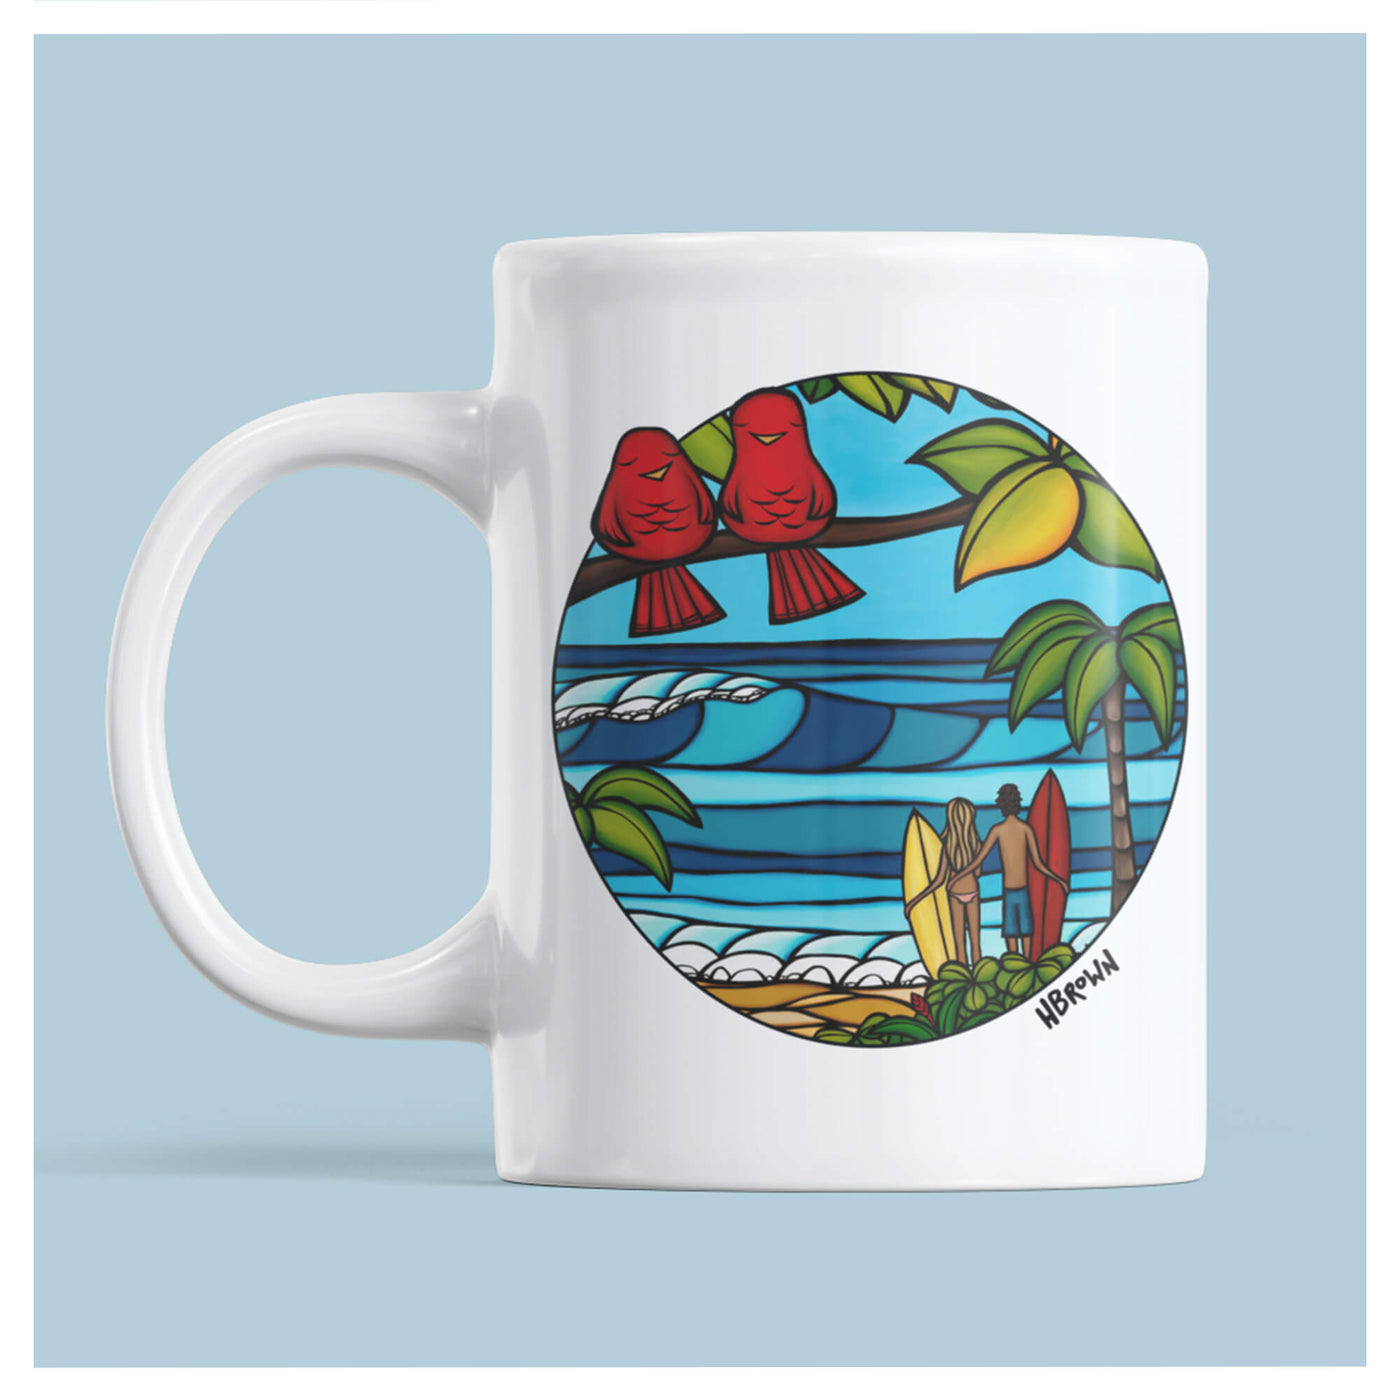 A white ceramic mug featuring two red love birds on a branch framing a beautiful tropical view with a surf couple by Hawaii surf artist Heather Brown